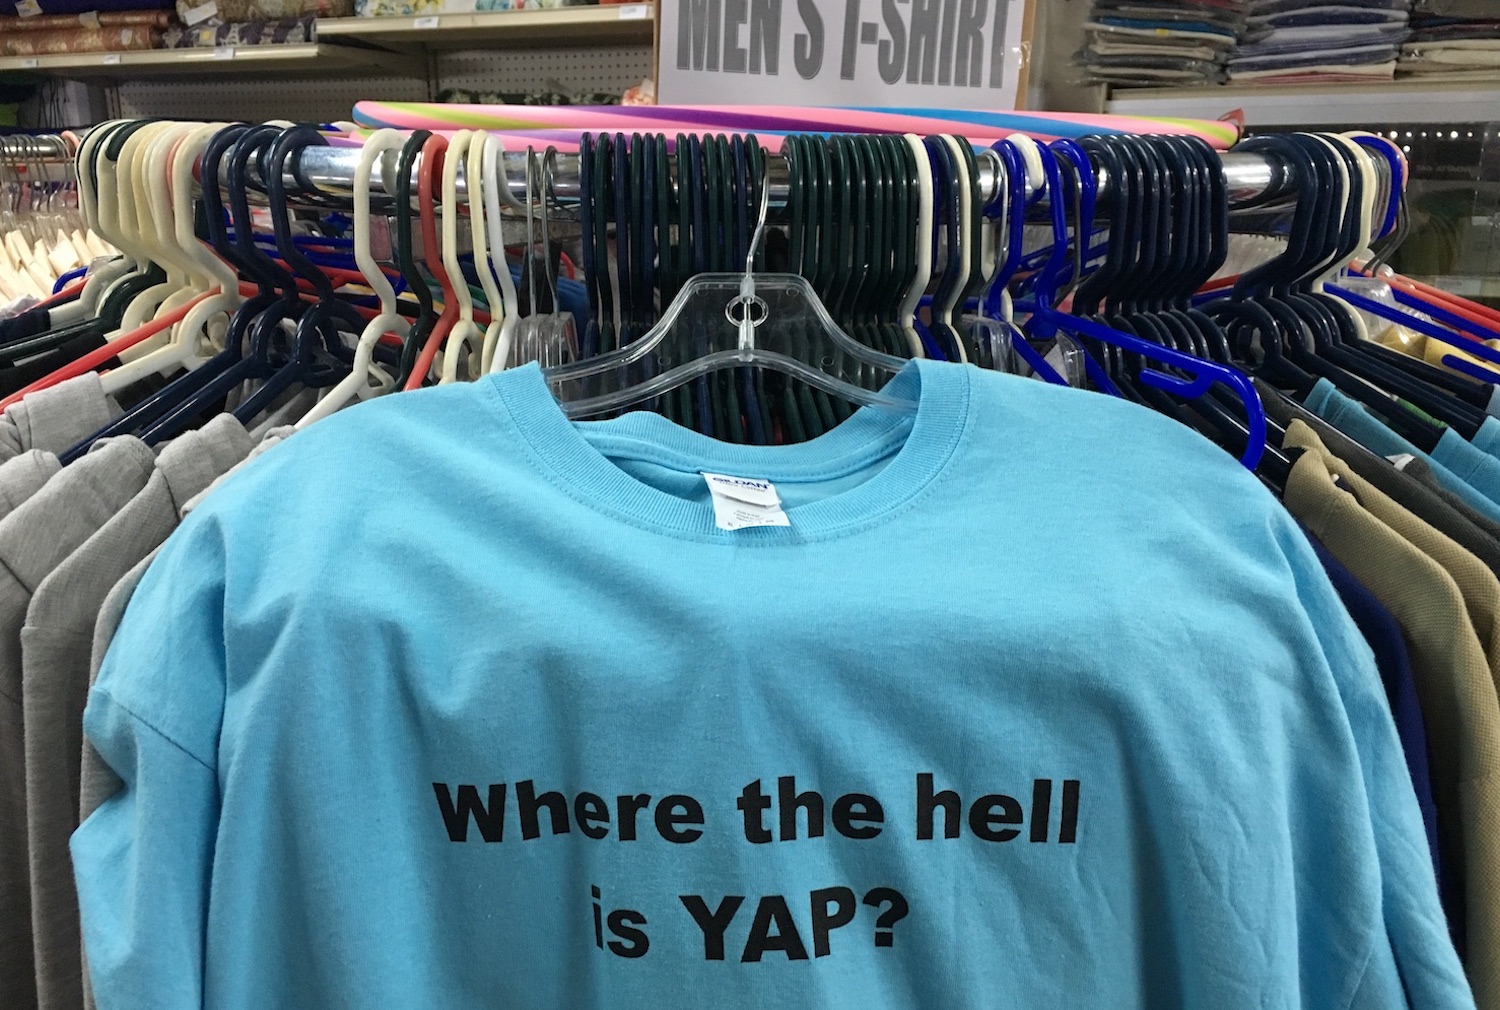 "Where the hell is Yap?" T-shirt